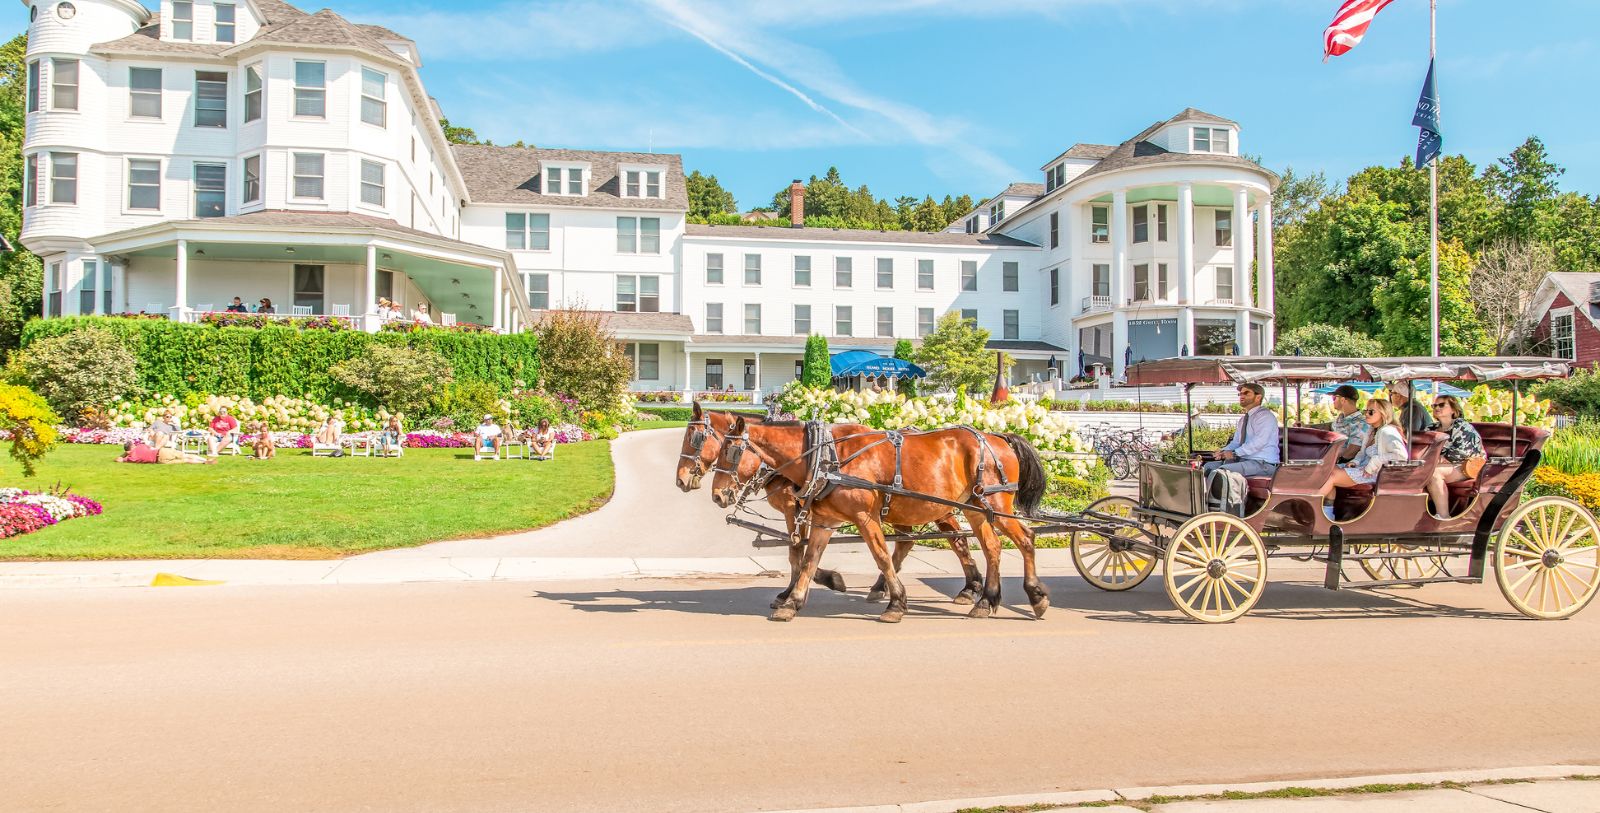 Explore Fort Mackinac, the Wings of Mackinac Butterfly Conservatory, and Arch Rock of Mackinac Island State Park.